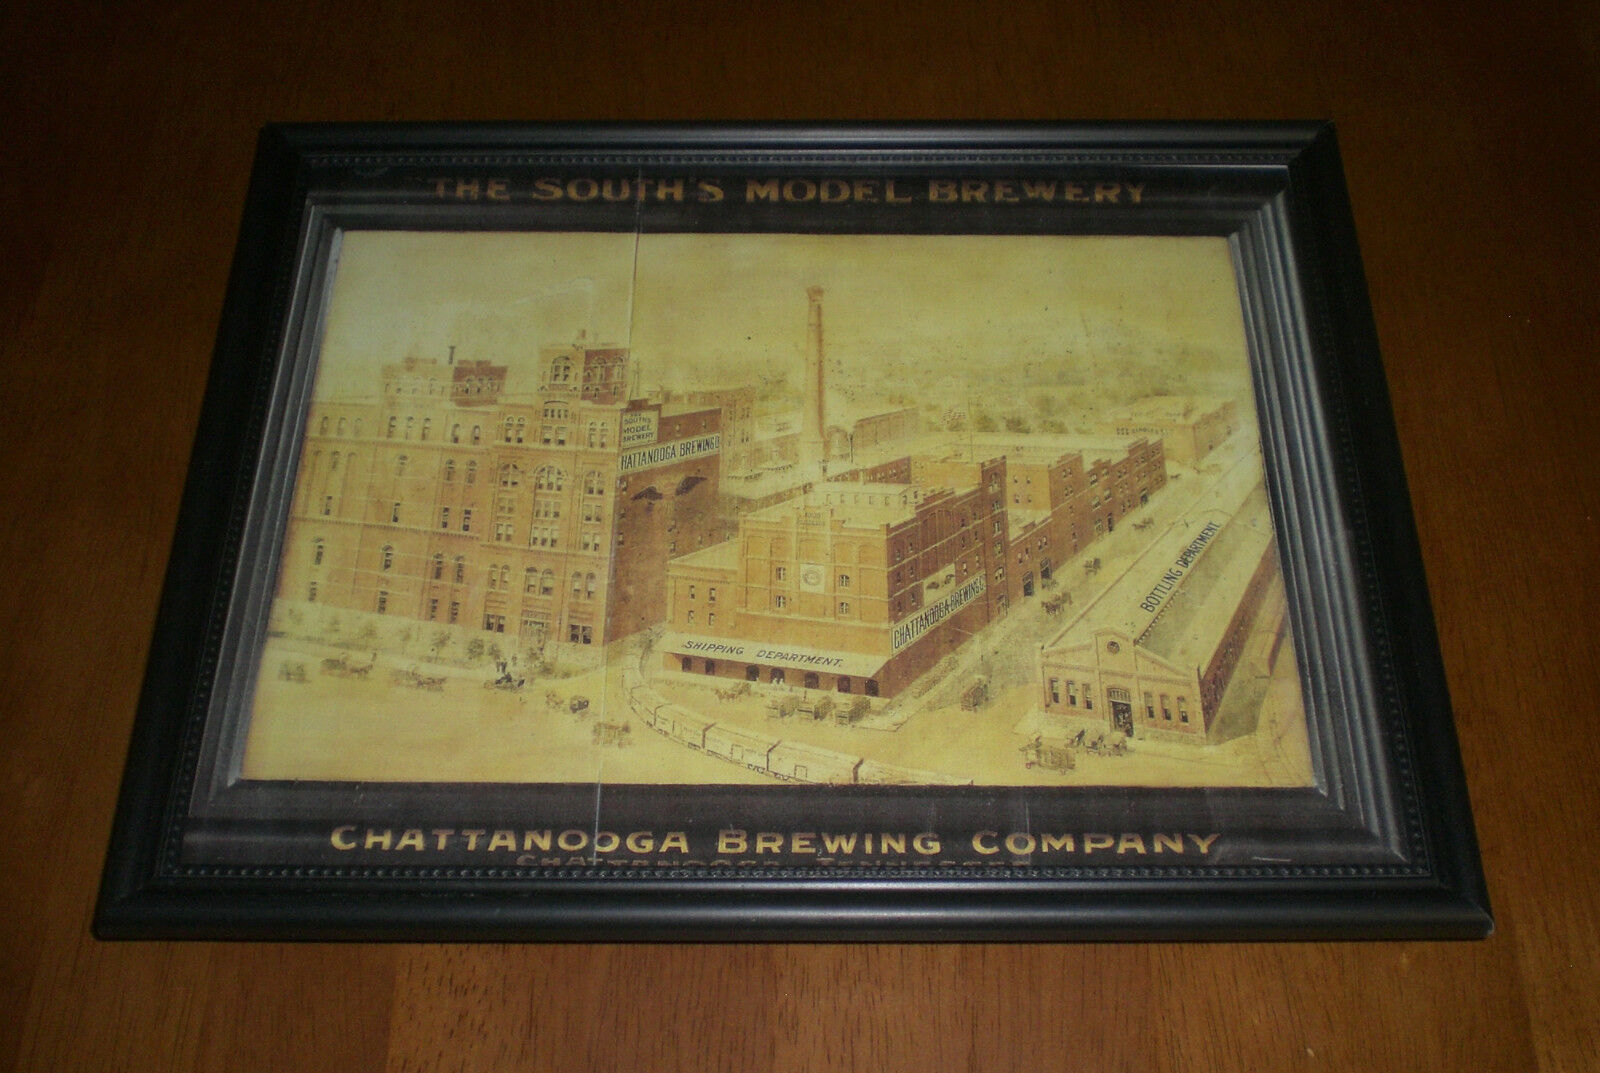 CHATTANOOGA BREWING COMPANY FRAMED COLOR PRINT 